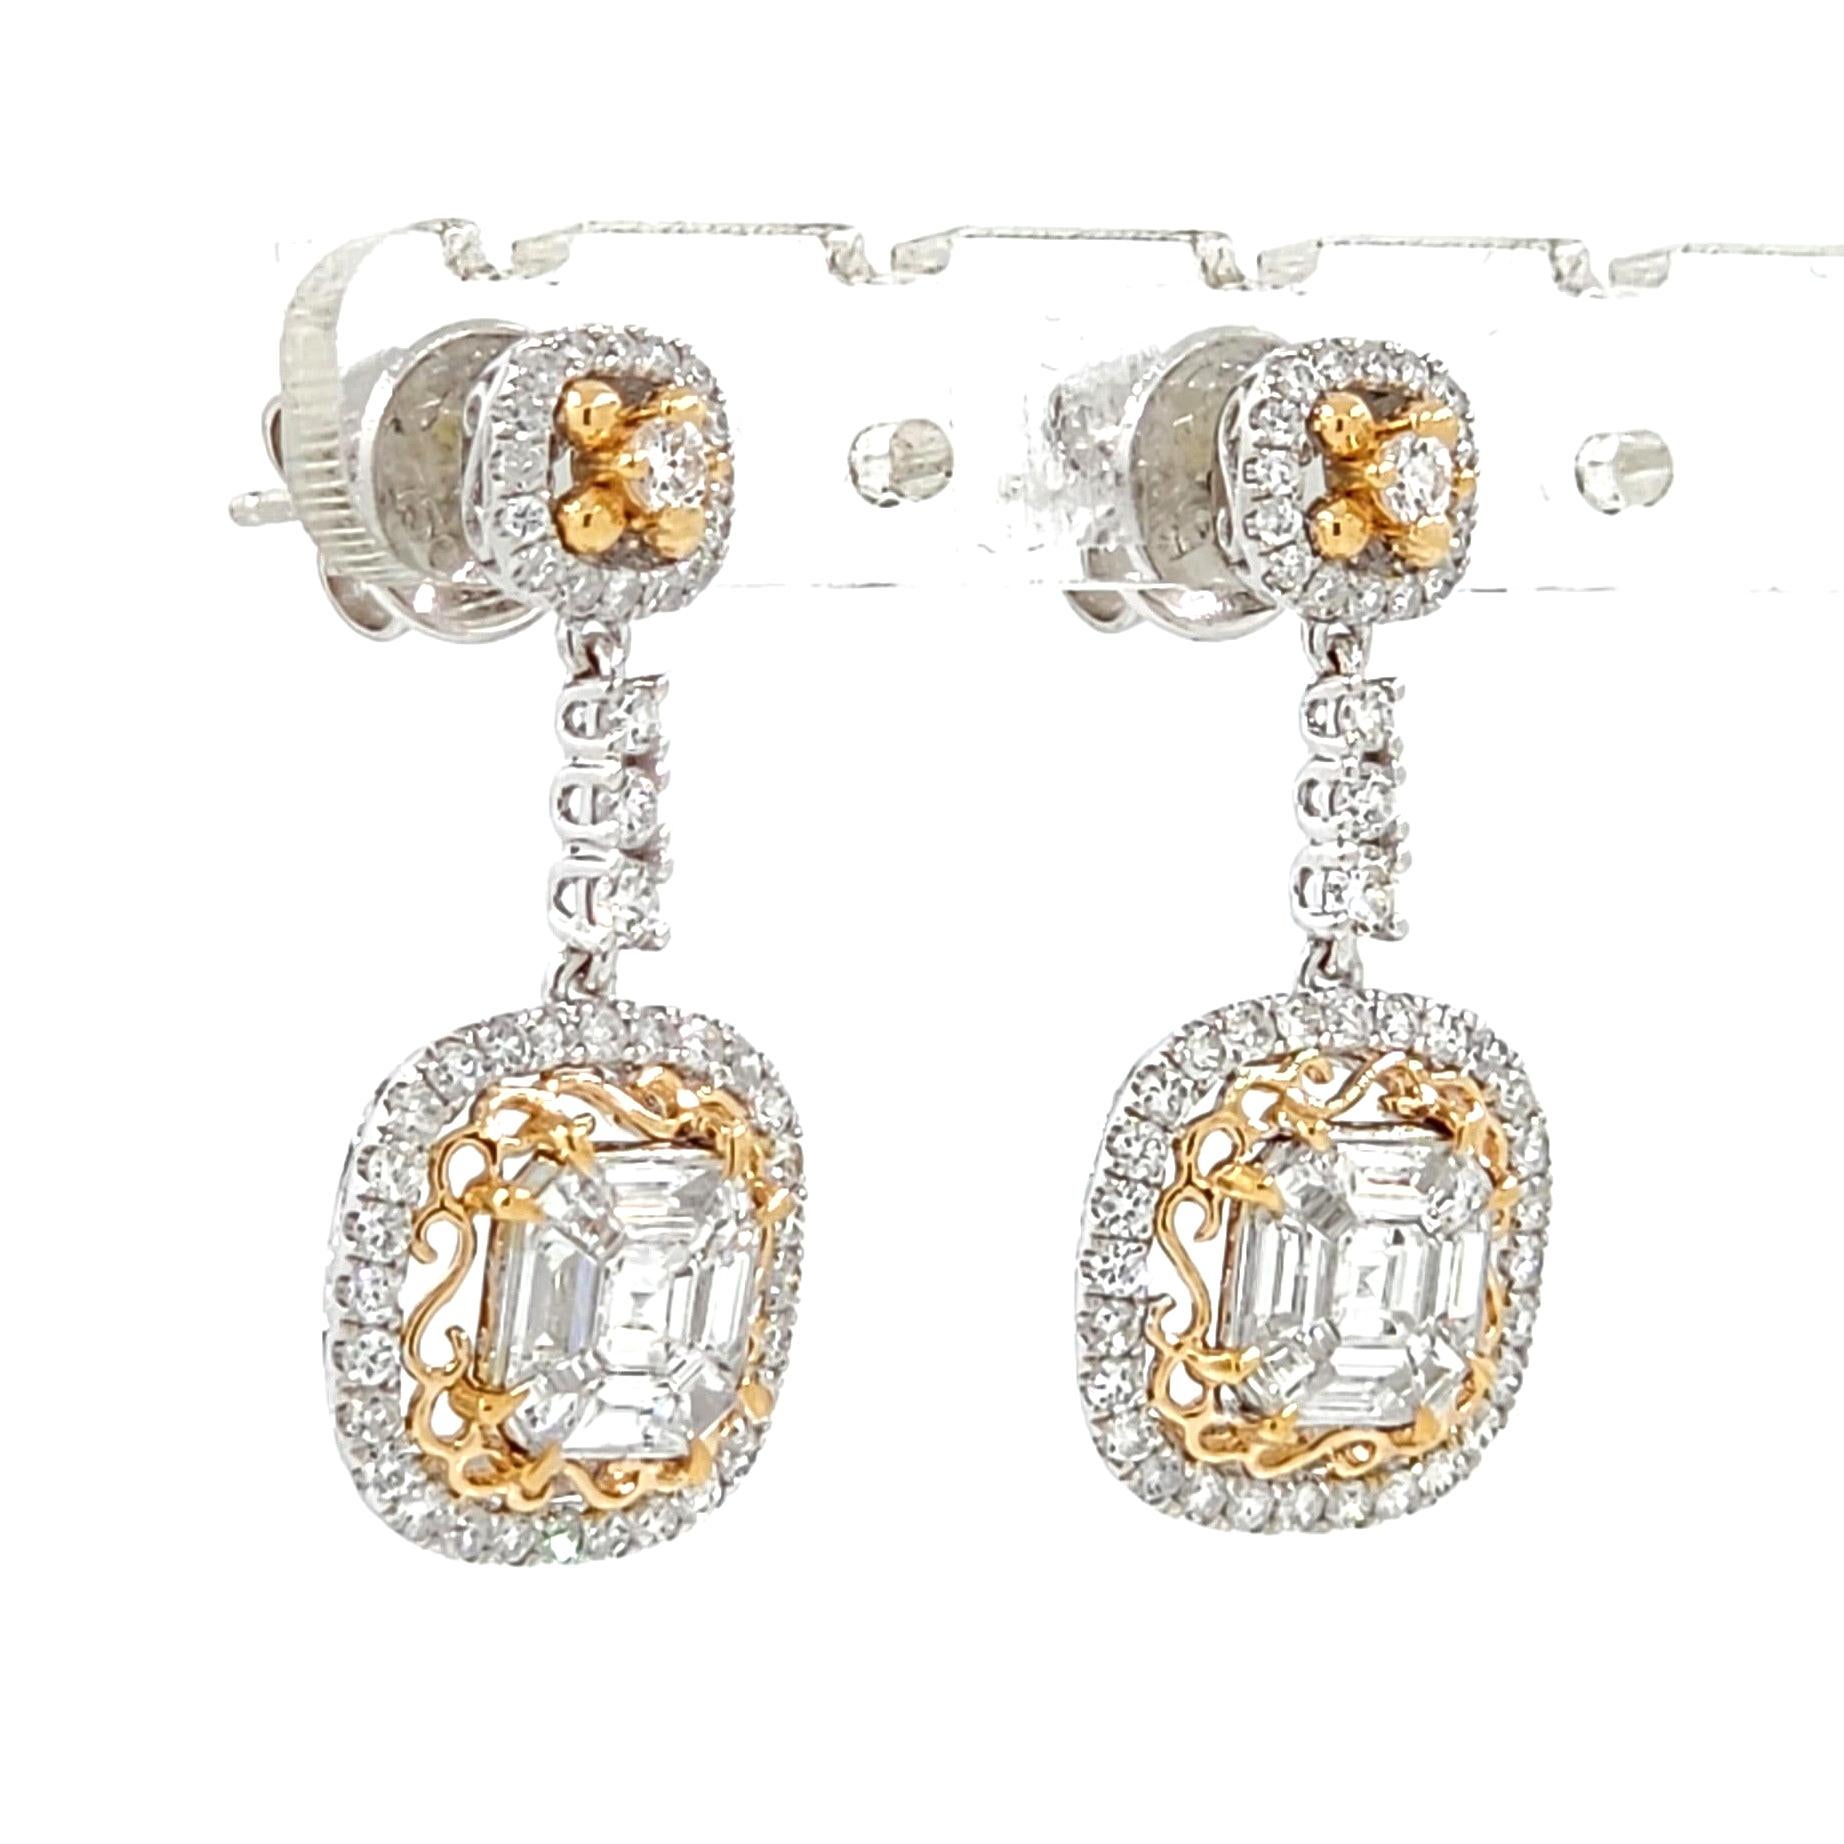 Dive into the realm of sophistication with our 1.74CT Illusion Setting Diamonds Drop Earrings, set in a harmonious blend of 18-karat rose and white gold. A true work of art, these earrings are designed to amplify elegance and catch every eye in the